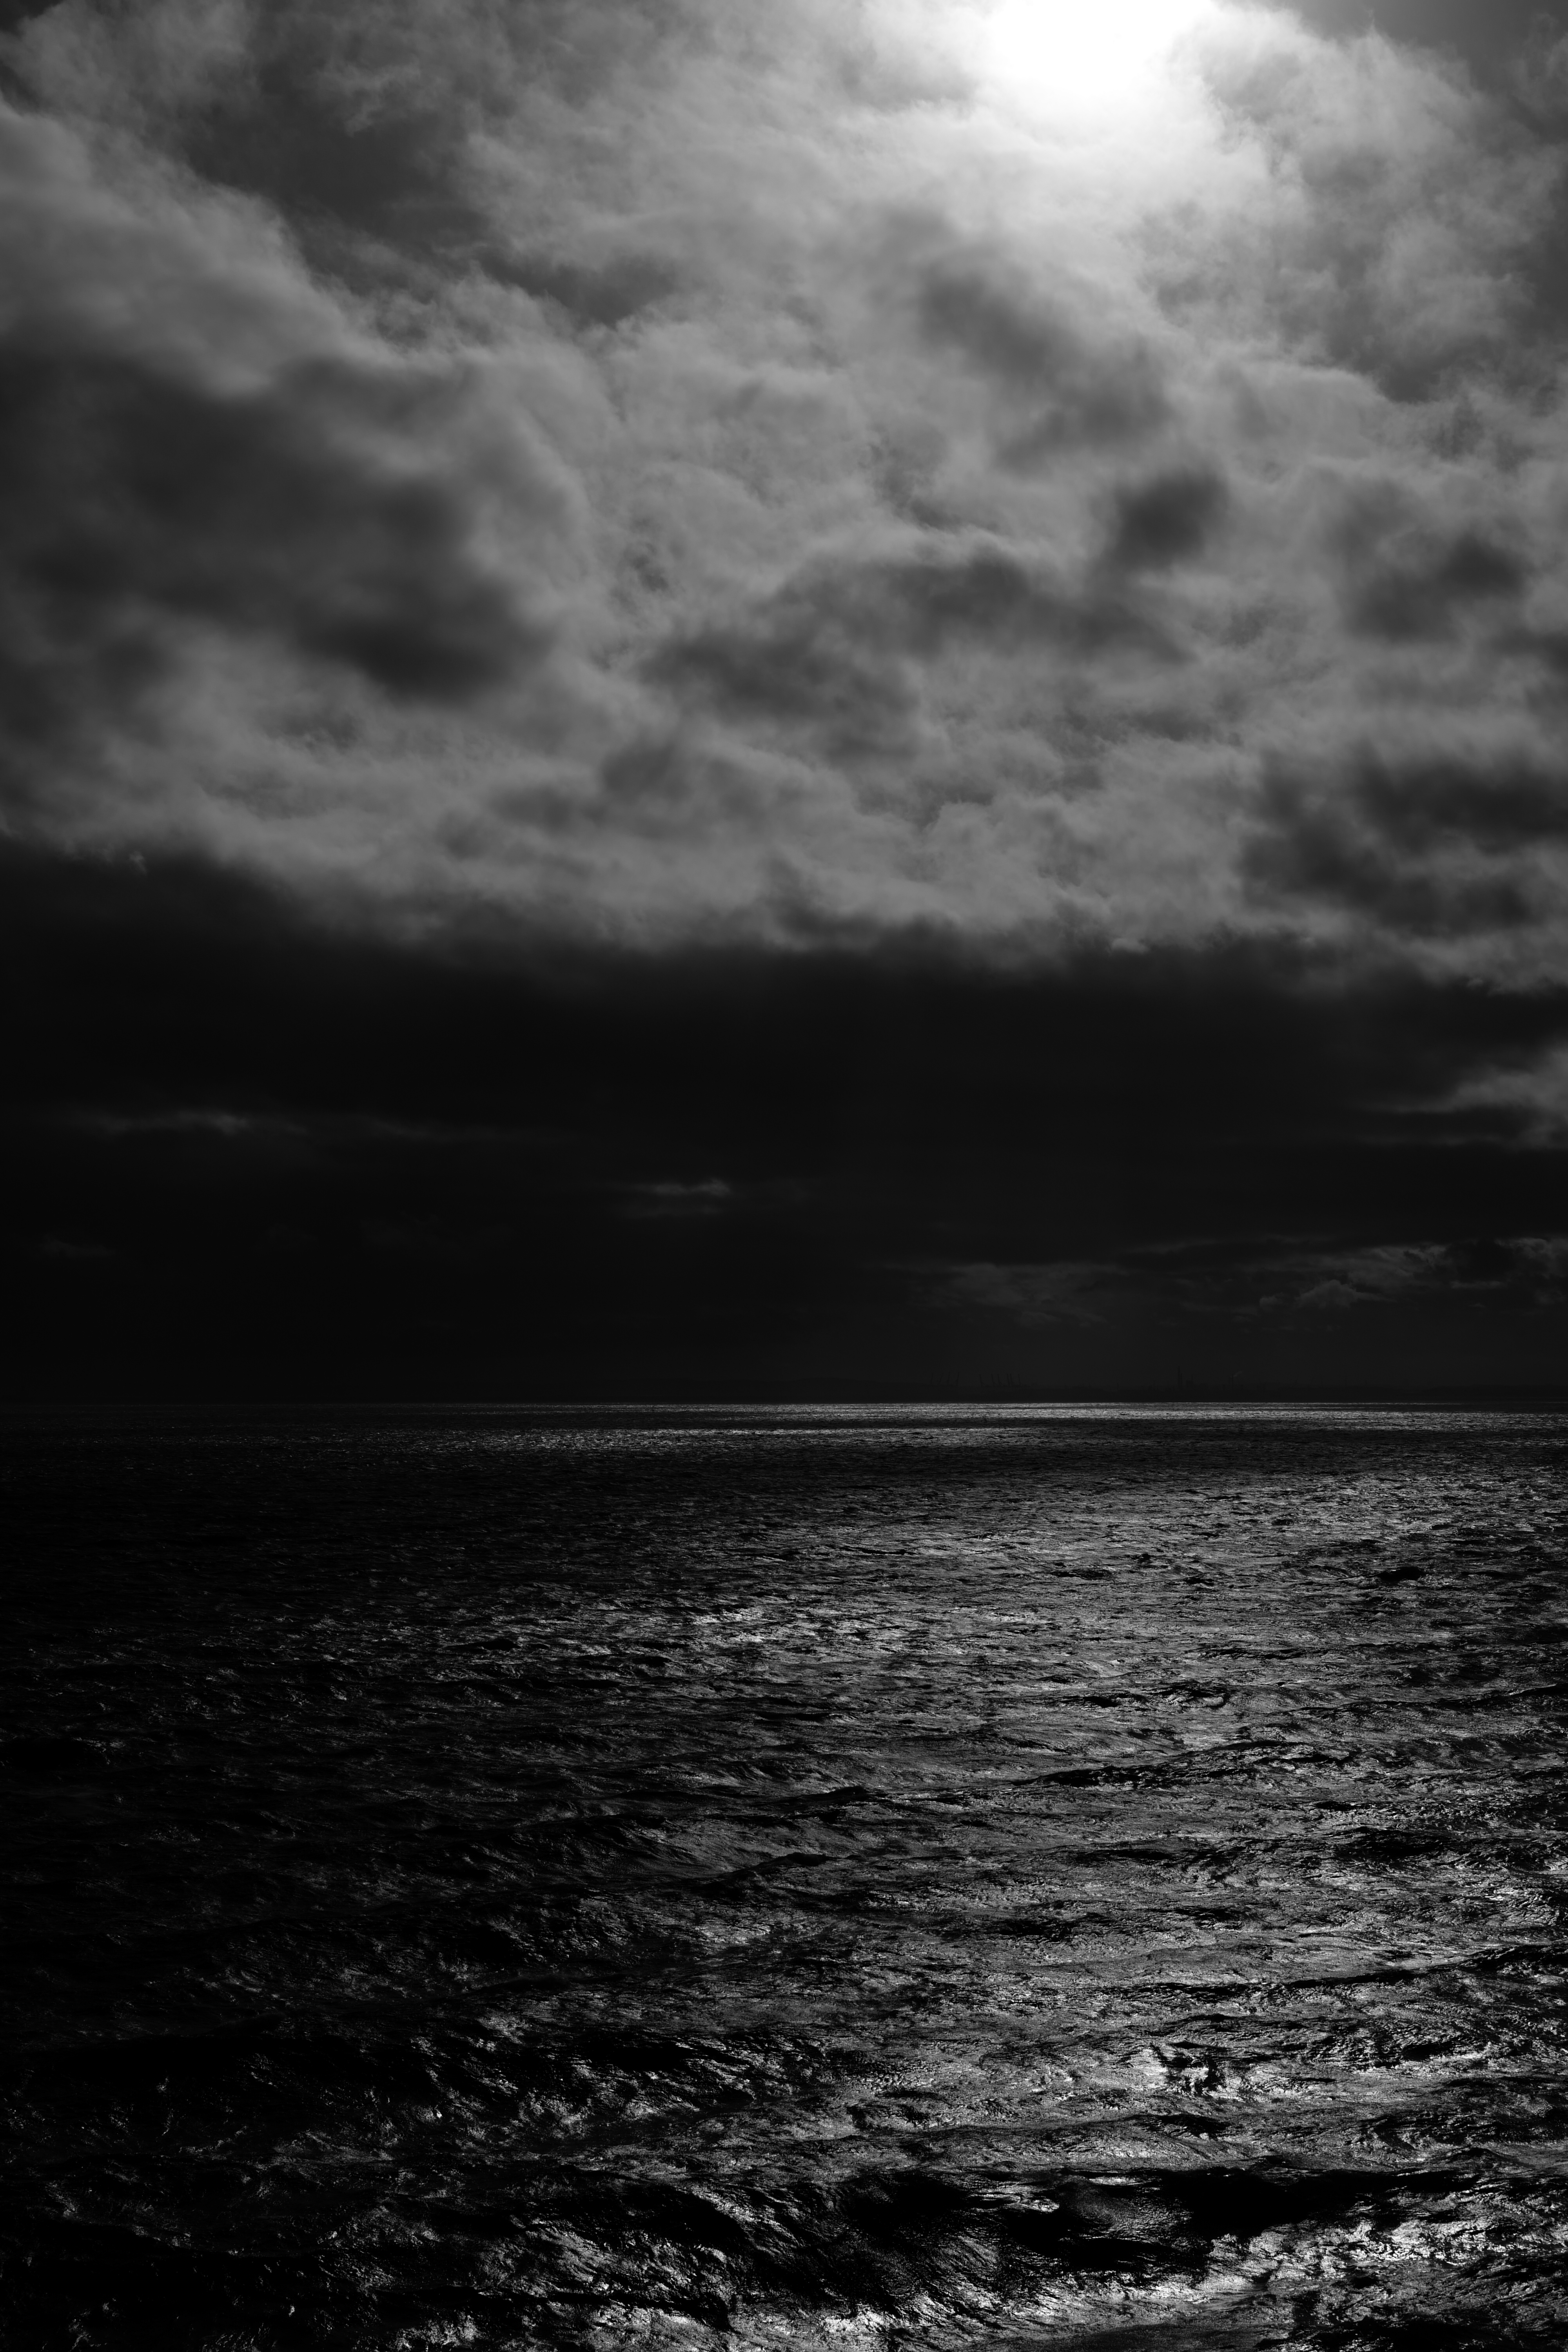 79807 download wallpaper black, sea, clouds, horizon, ripples, ripple, bw, chb, mainly cloudy, overcast screensavers and pictures for free